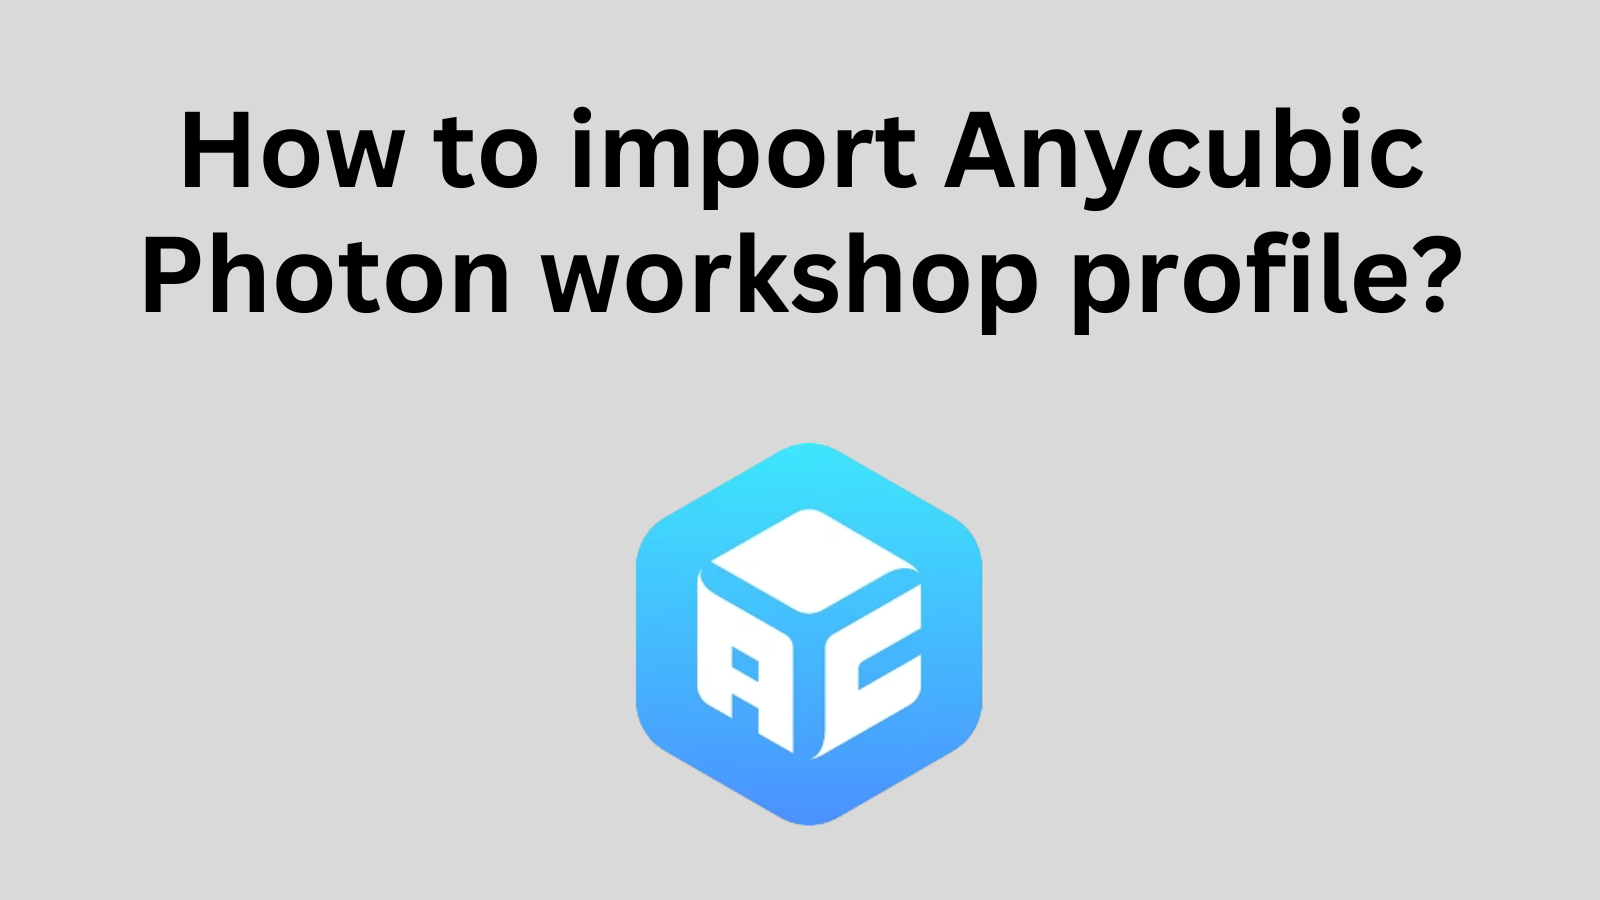 How to import the SirayaTech profile in Anycubic Photon Workshop